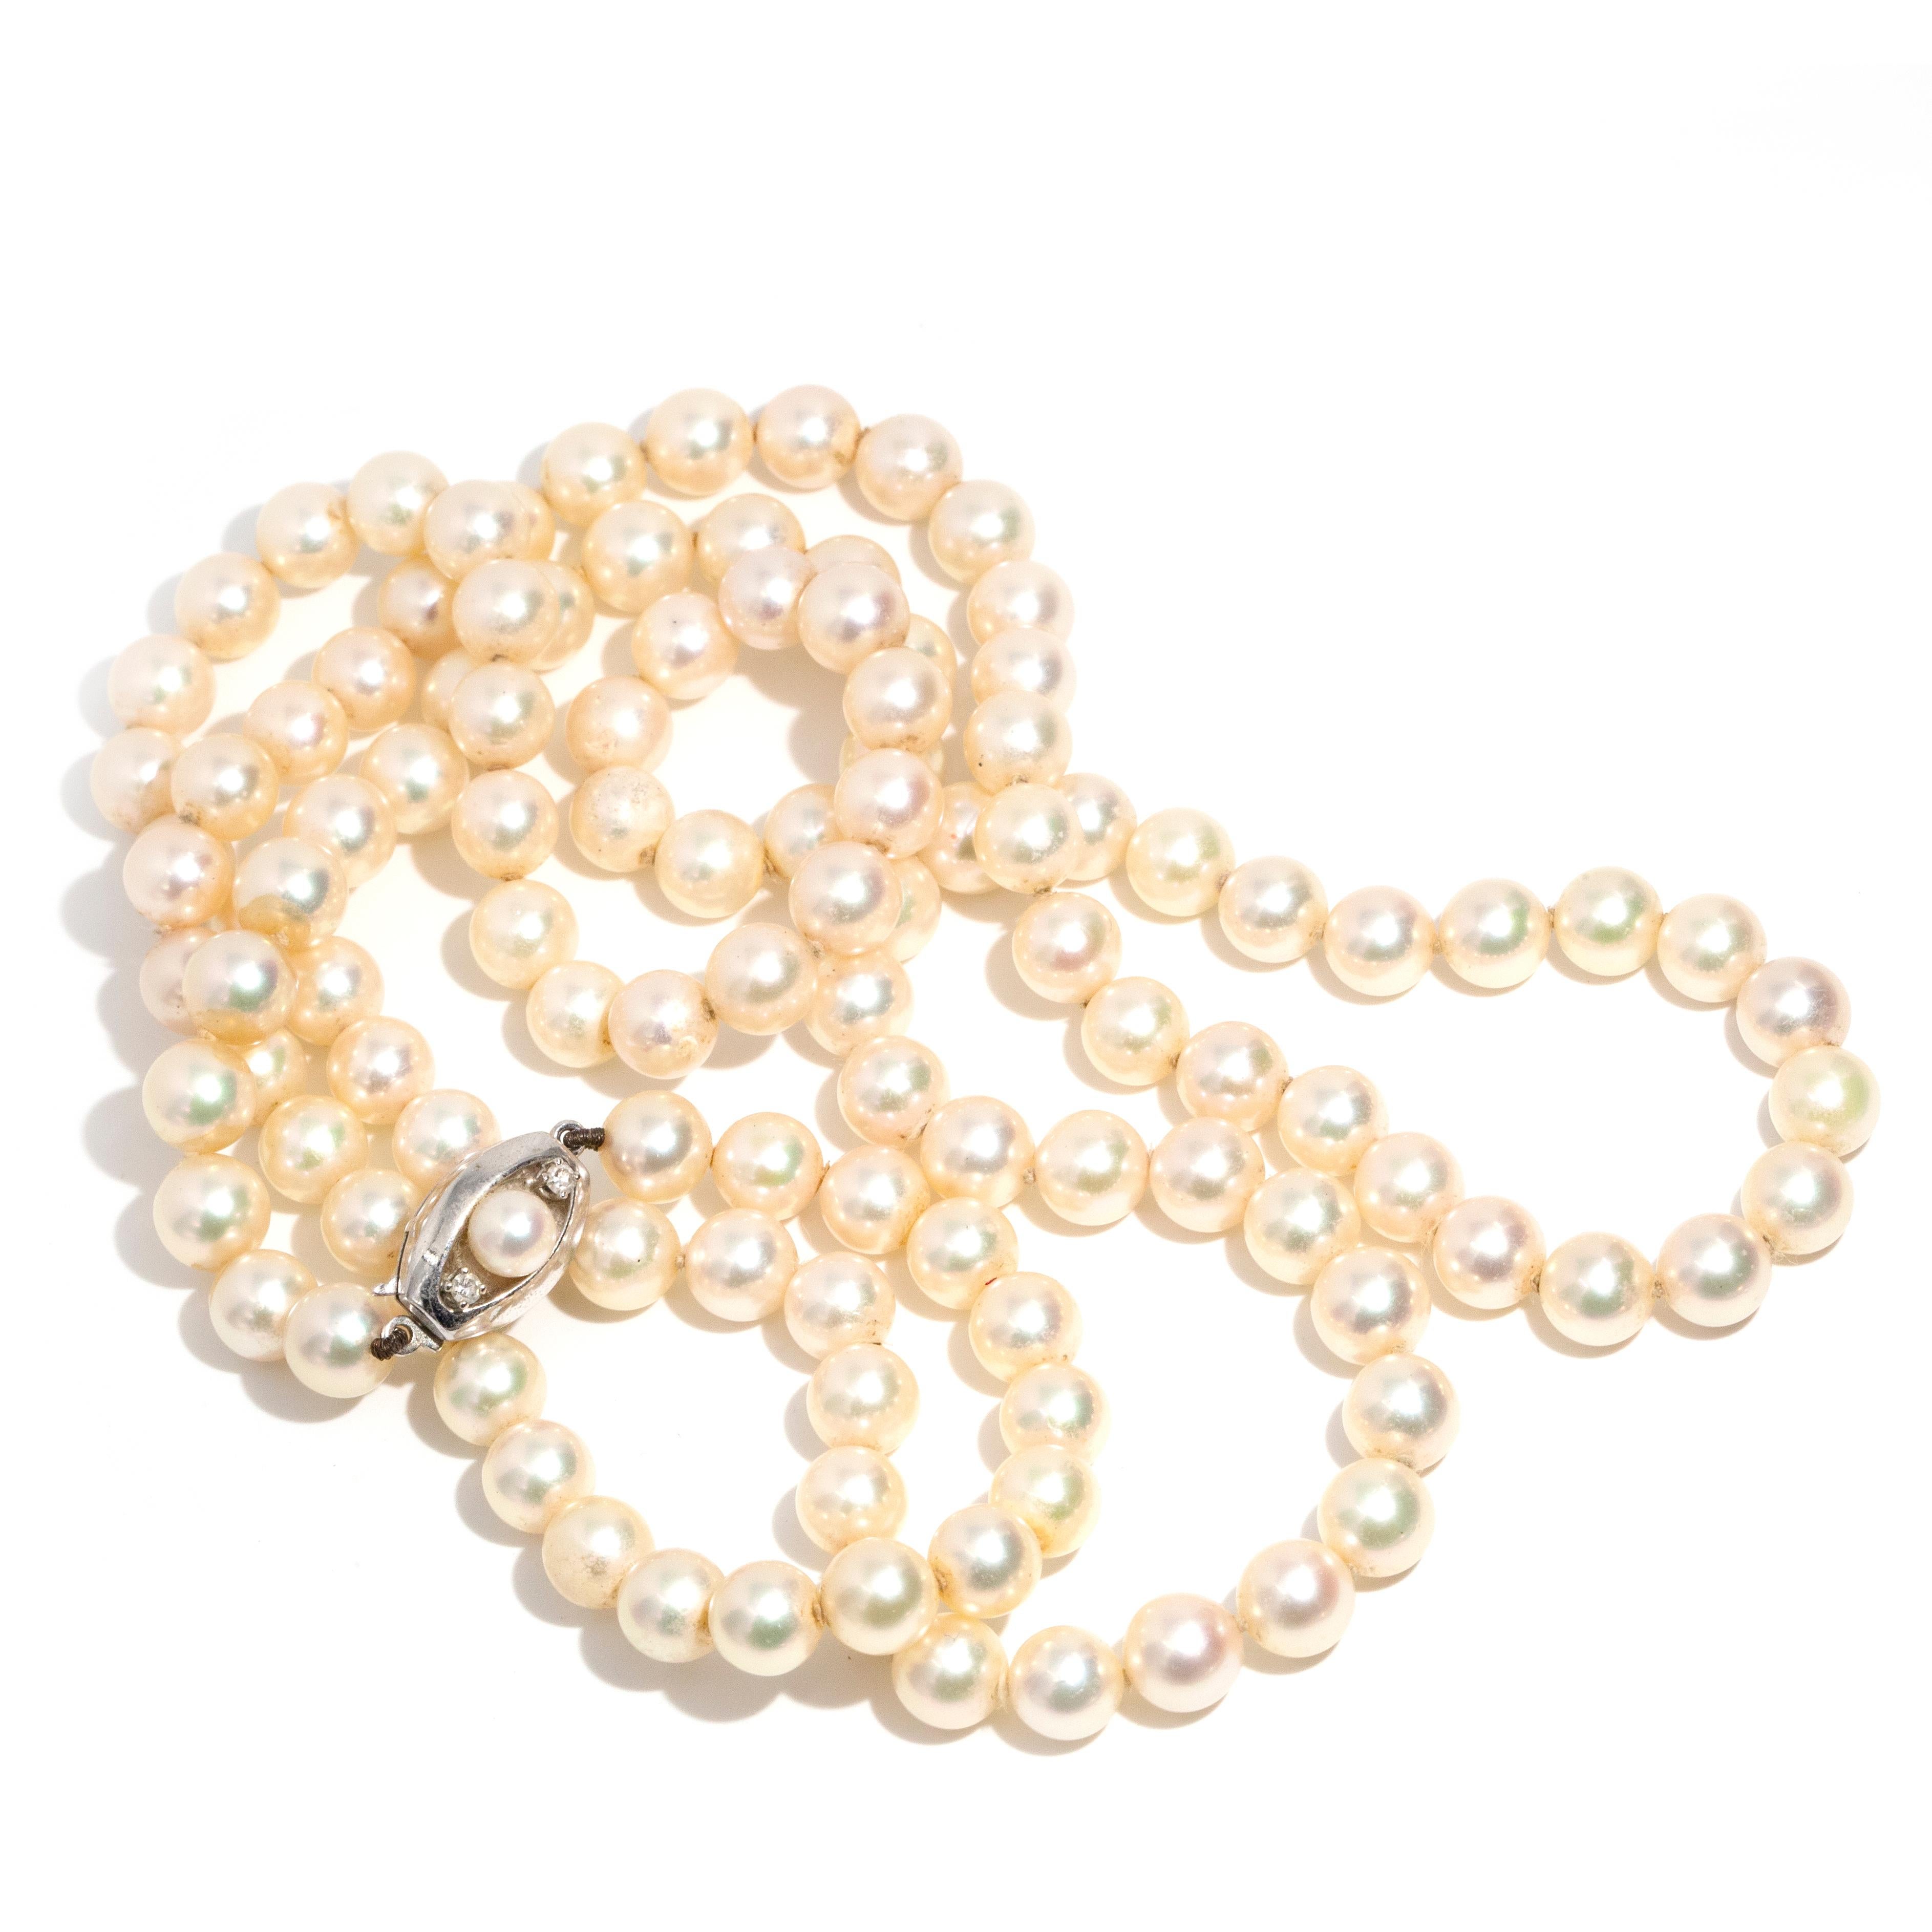 Modern Vintage 1990s Cultured High Lustre Cream Colour Akoya Pearl Strand Necklace